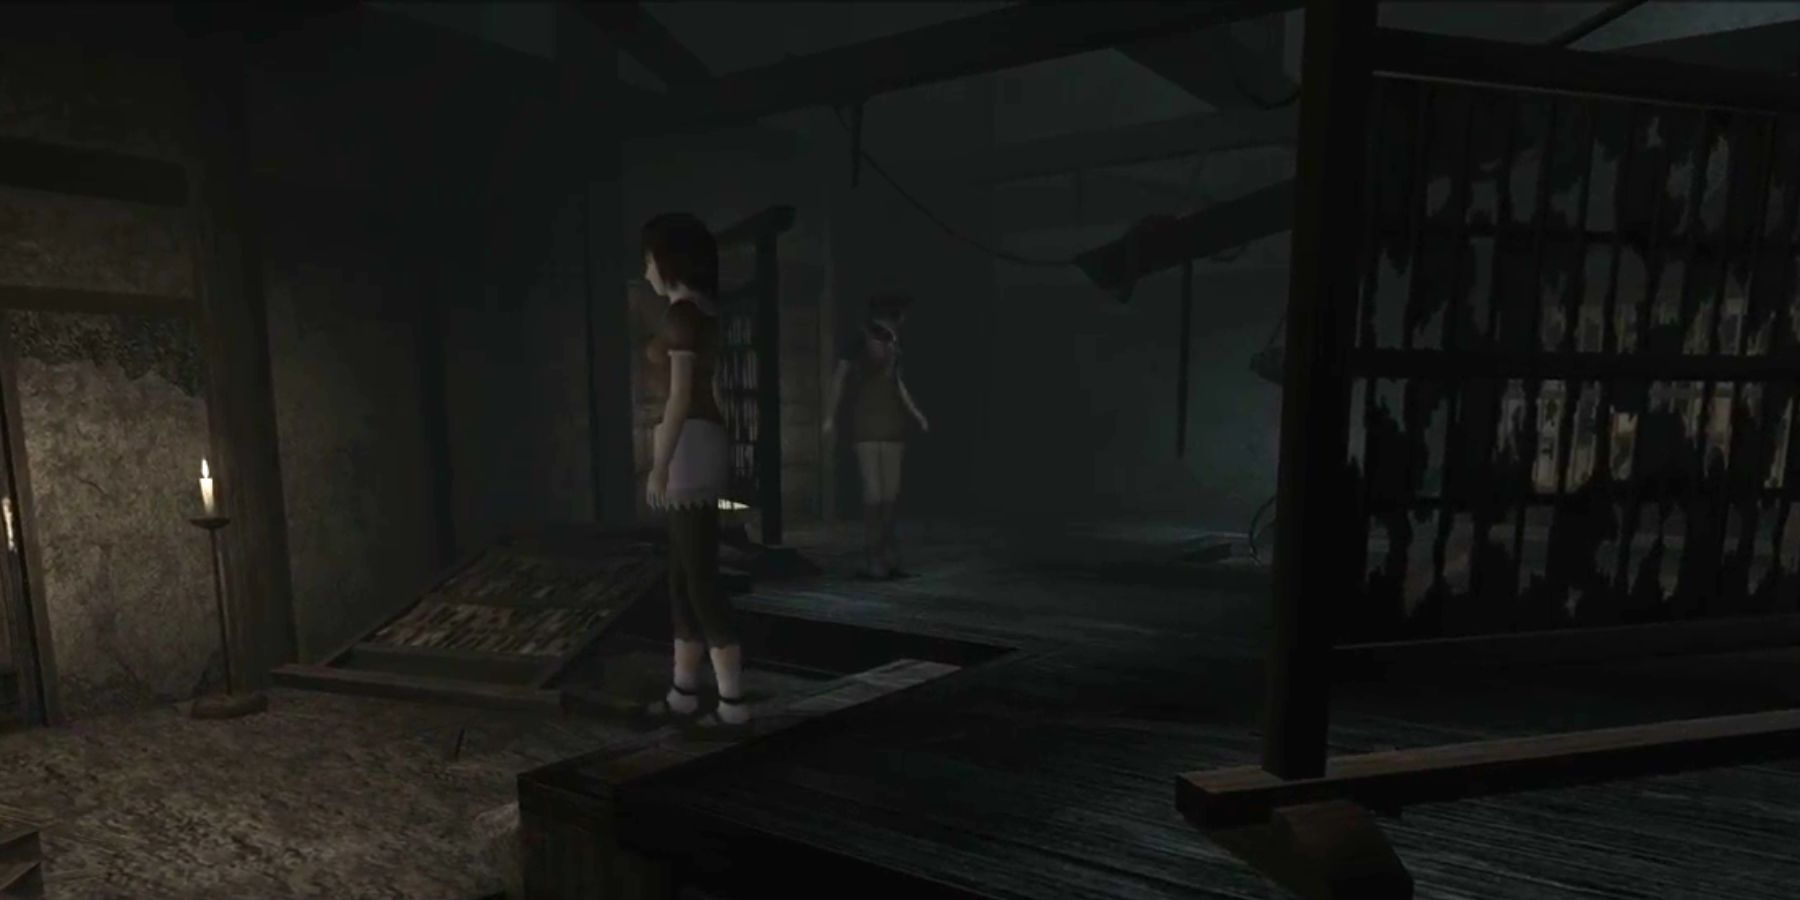 Mio and Mayu exploring a dilapidated house